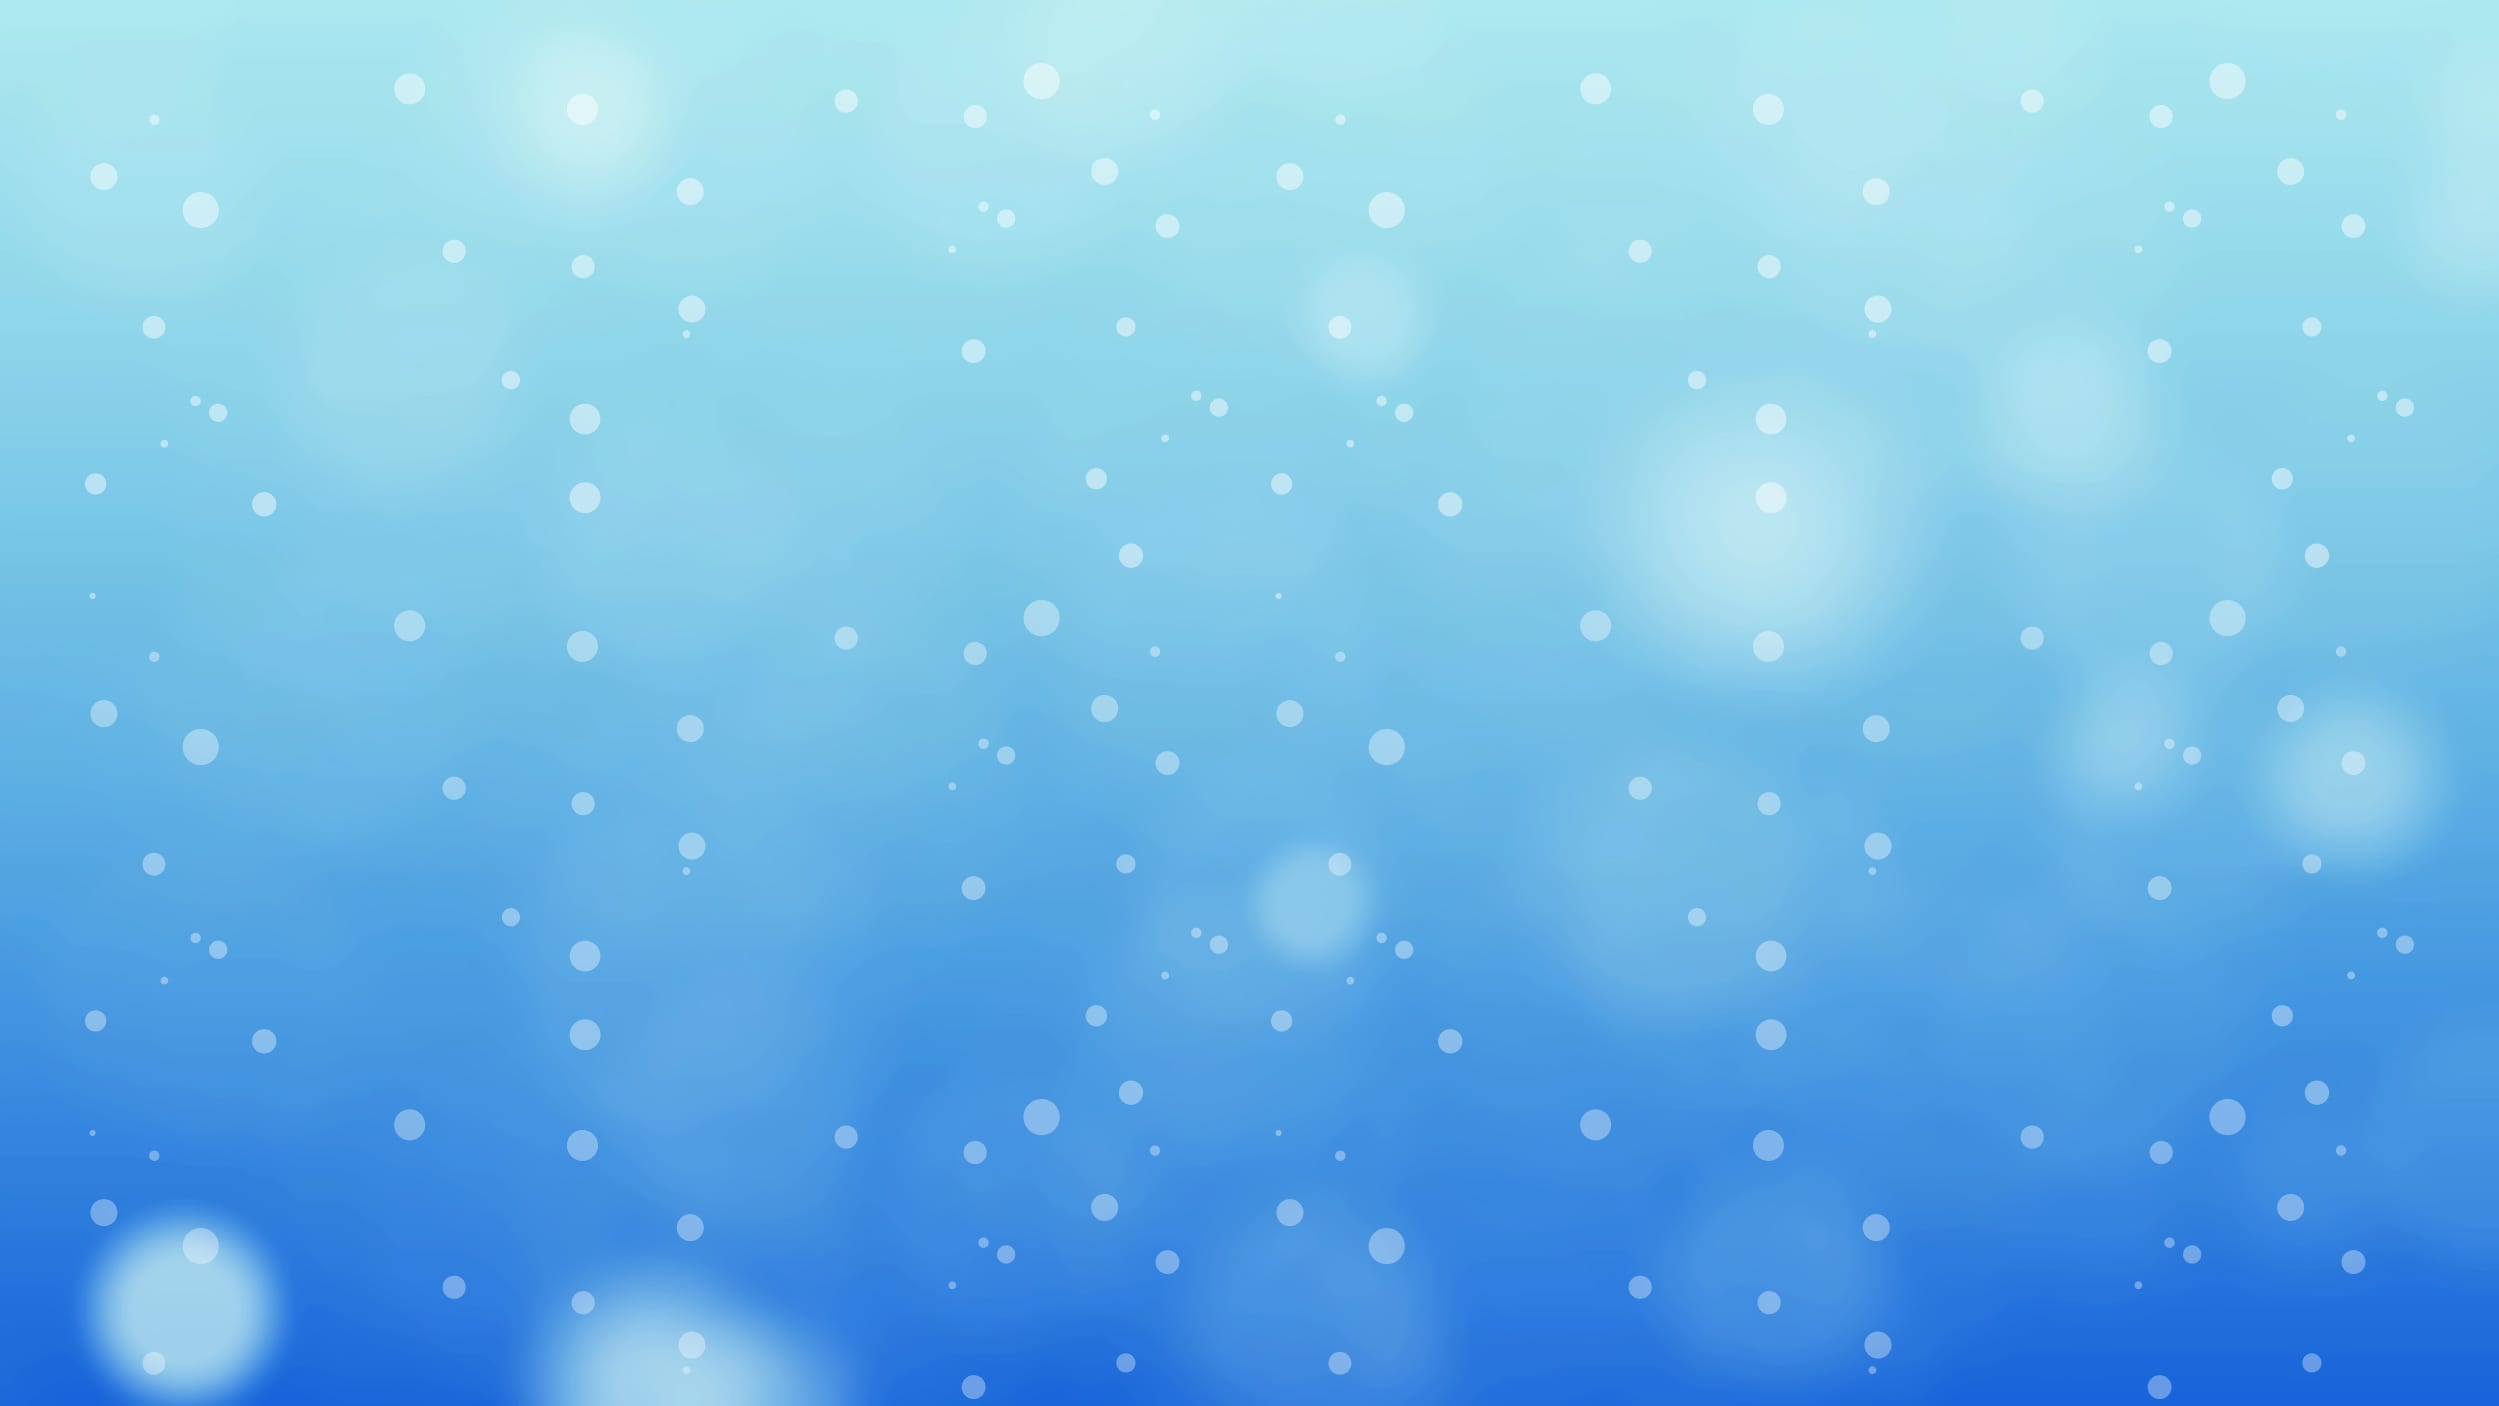 white-glitter-background-winter-theme-on-blue-background-look-like-snow-computer-generated_ba4ywewn__F0000  - NEGU - Jessie Rees Foundation